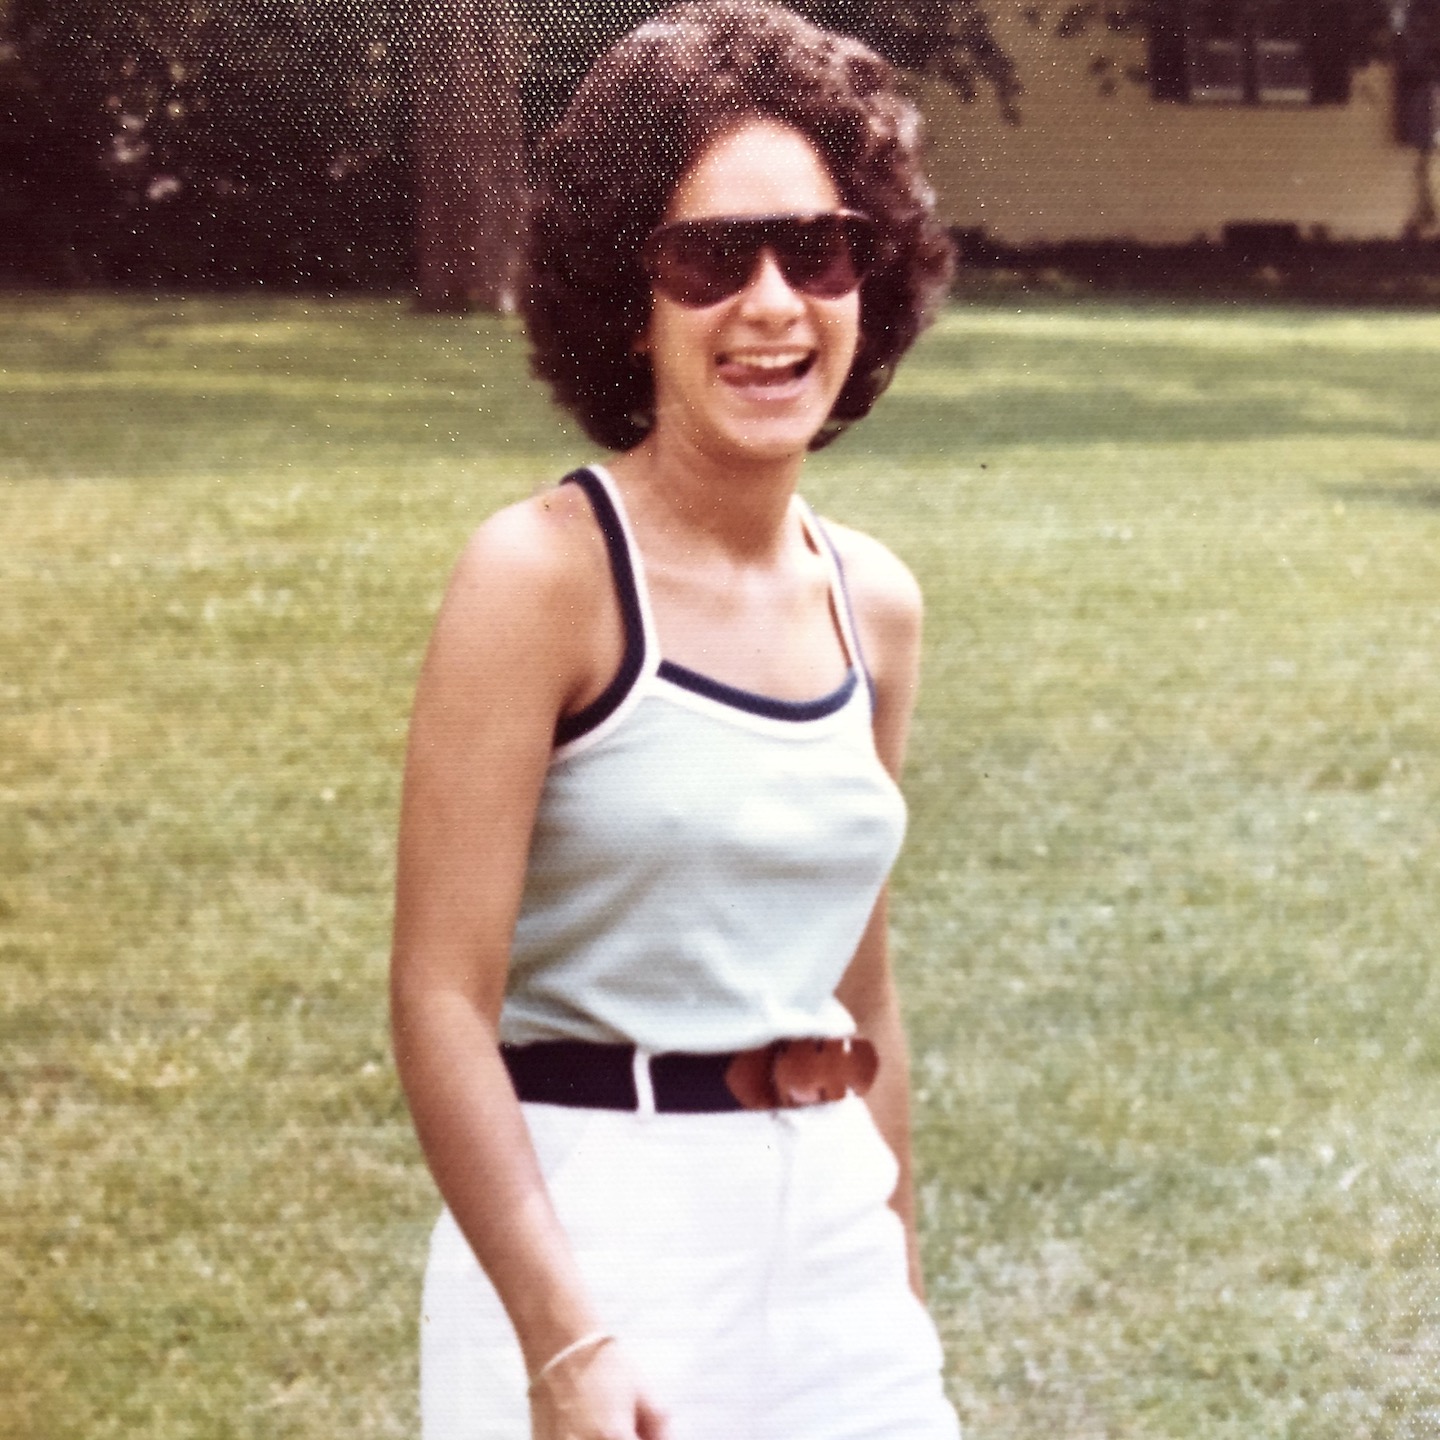 Cheryl Qamar on the day she came out to her mother. She shares, “I went to visit my friends and I was initially so relieved until I returned home later that day and [my mother] began the psychological torture…” Photo courtesy of Cheryl Qamar.